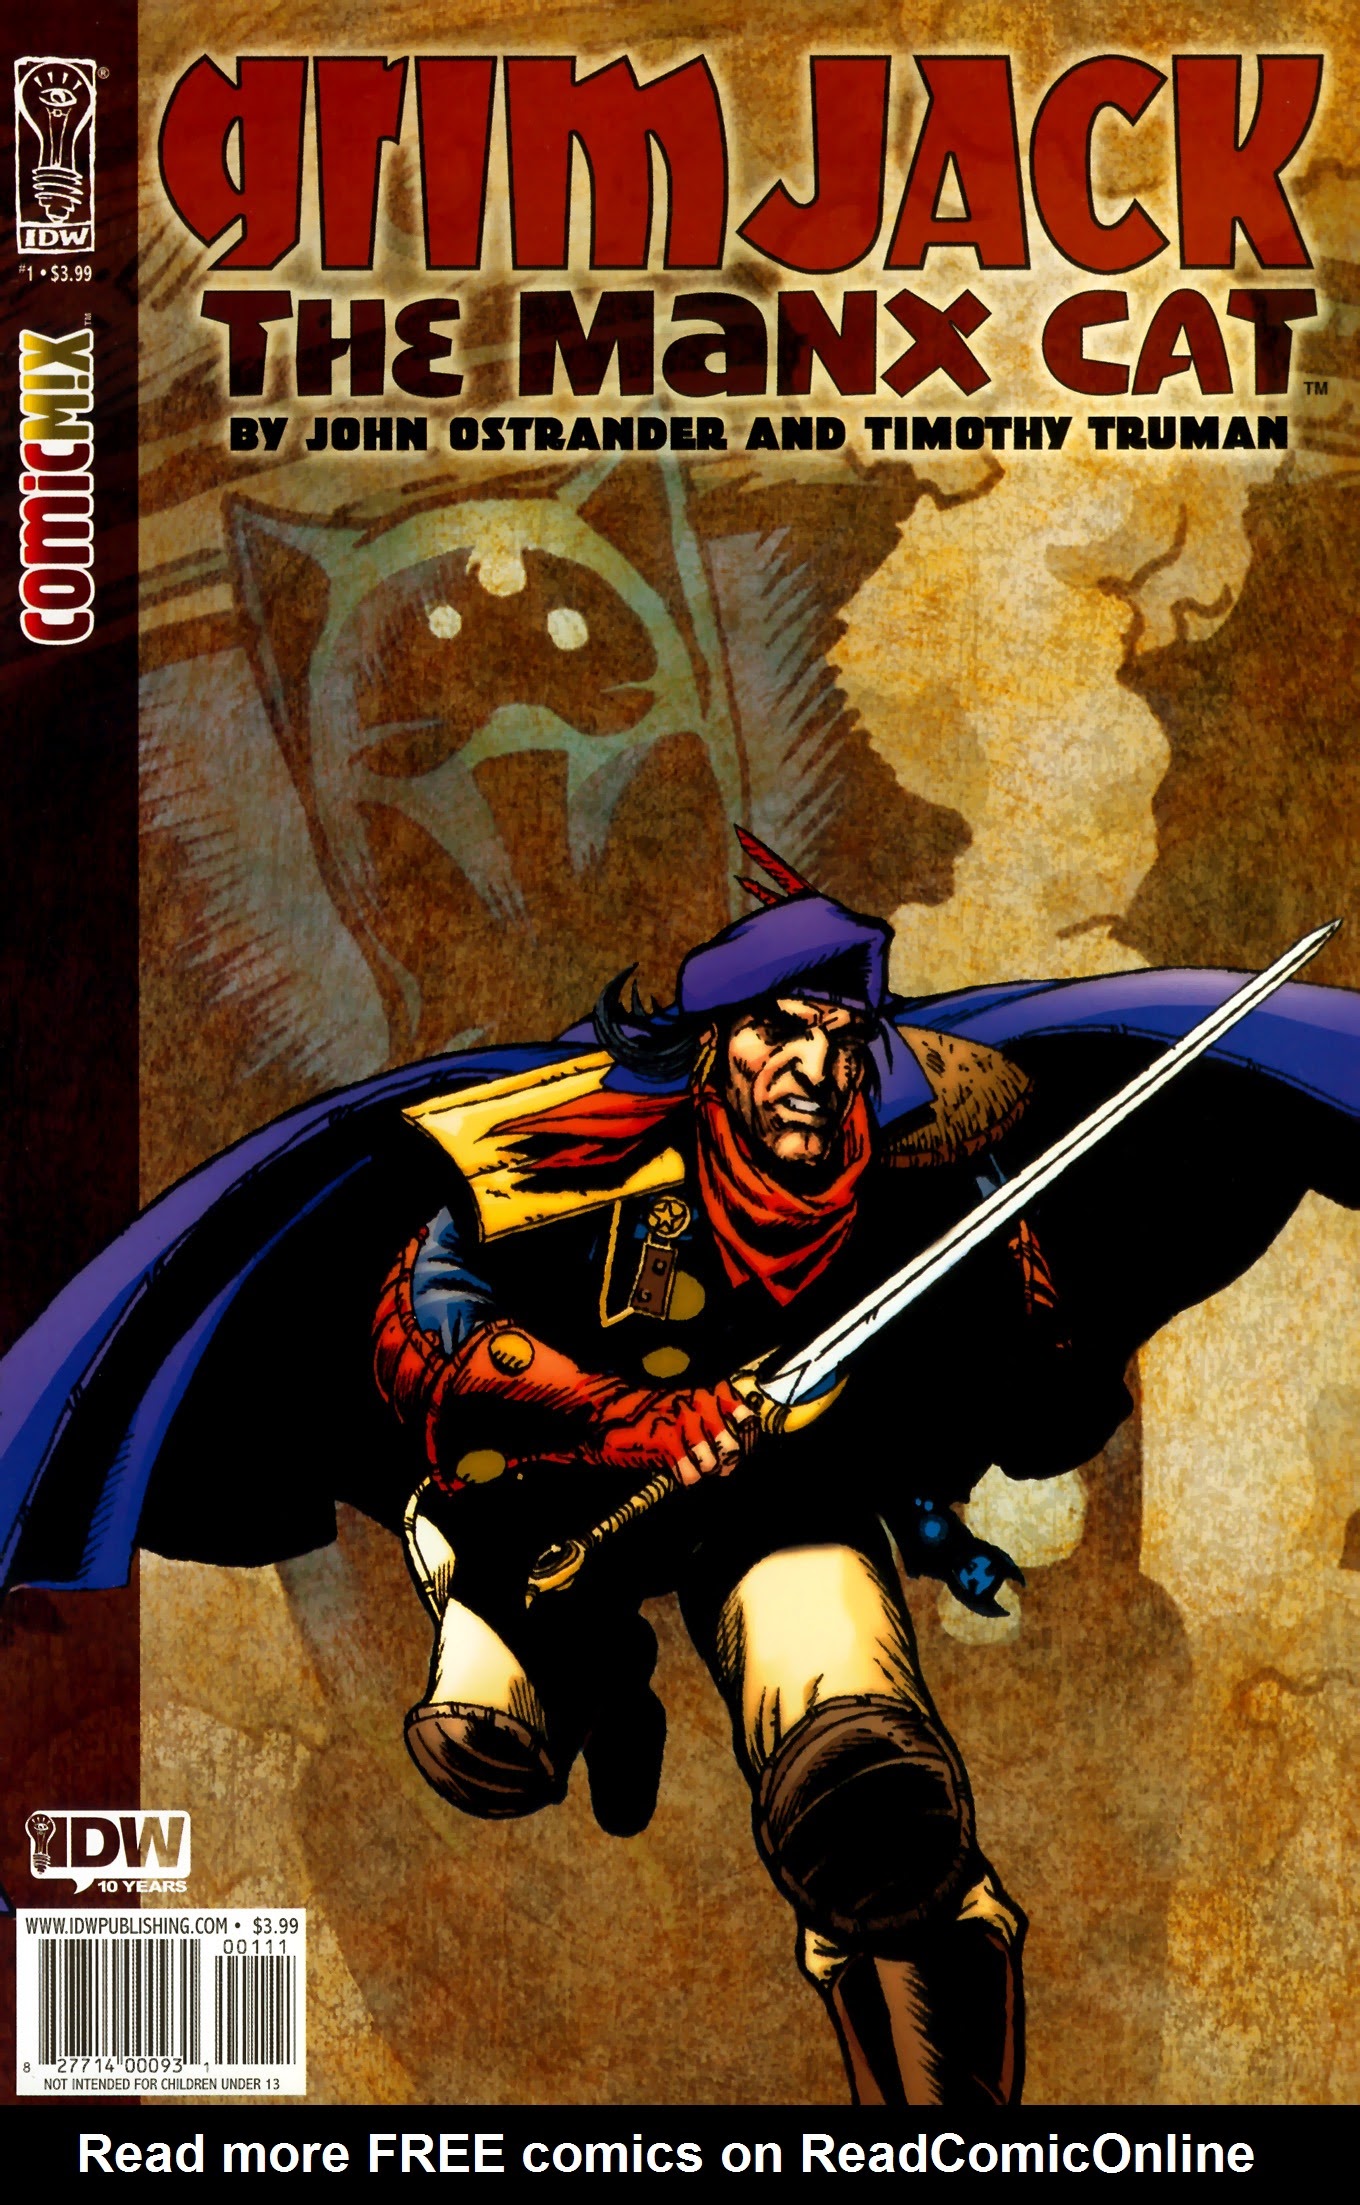 Read online GrimJack: The Manx Cat comic -  Issue #1 - 1